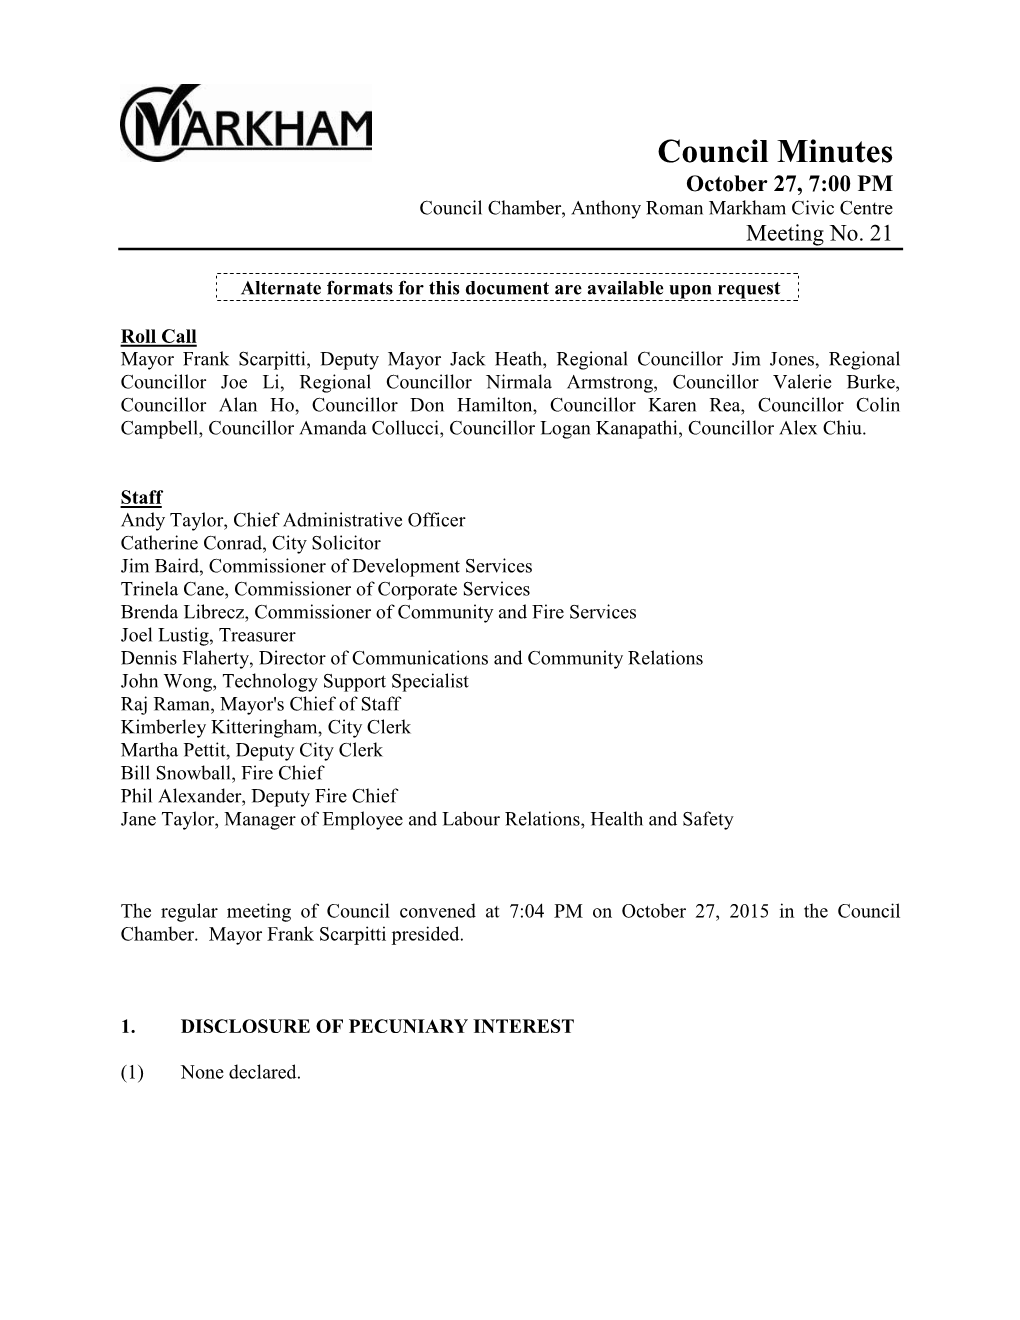 Council Minutes October 27, 7:00 PM Council Chamber, Anthony Roman Markham Civic Centre Meeting No